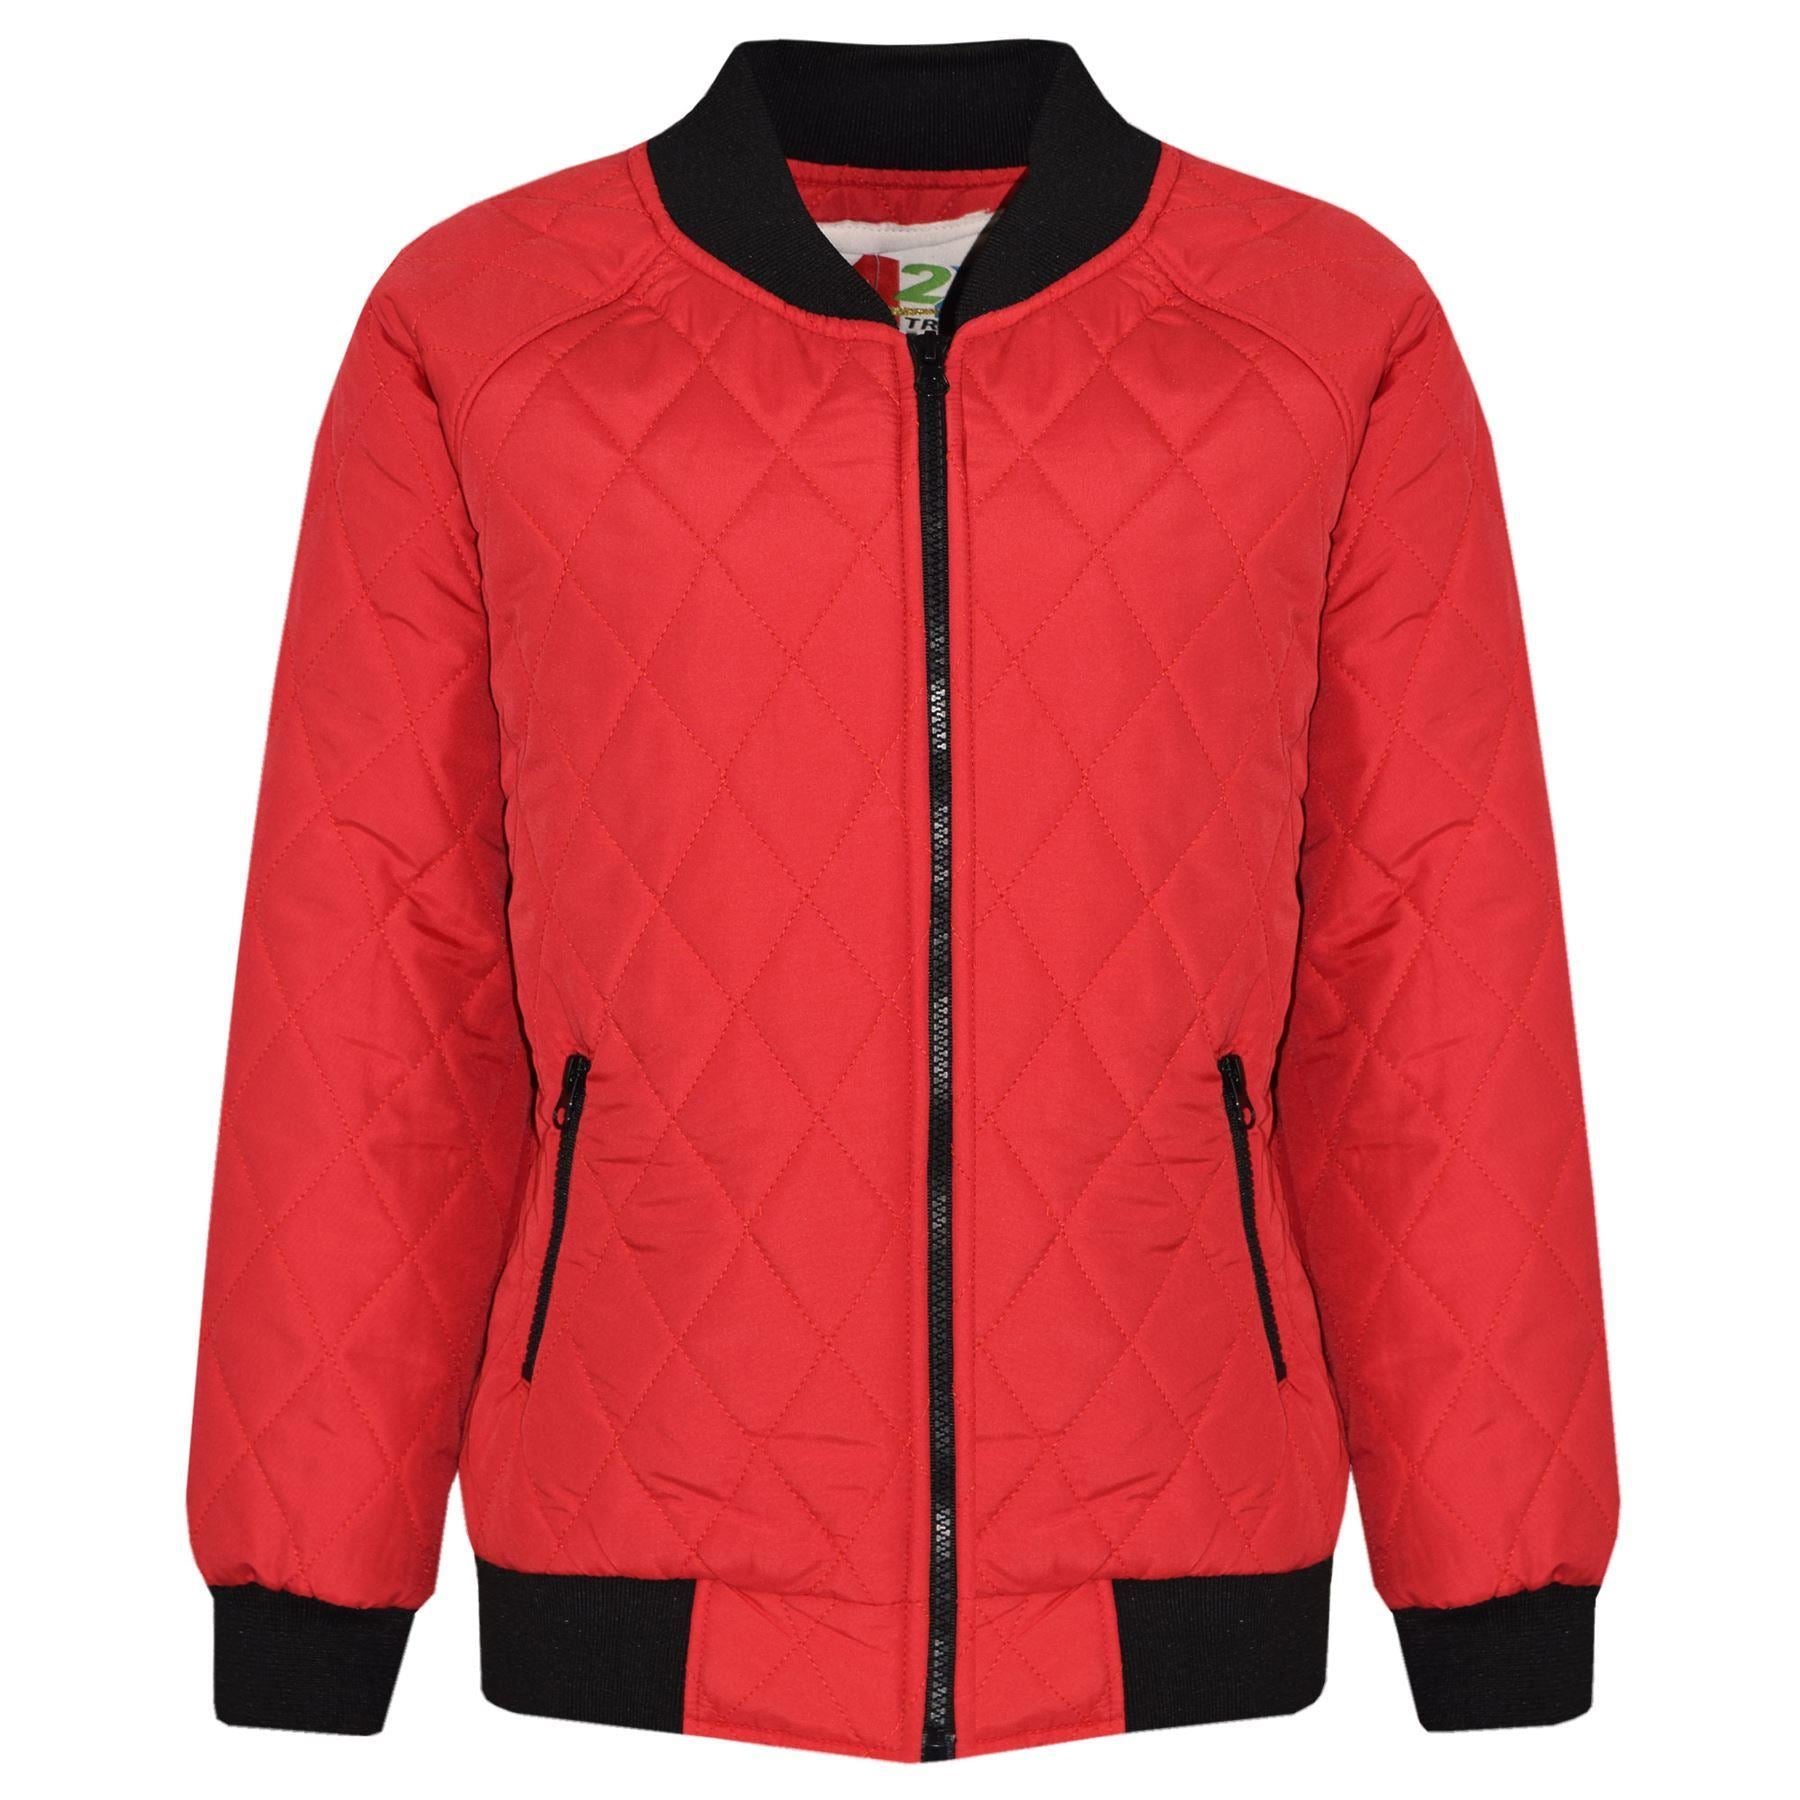 Kids Jacket Girls Boys Bomber Padded Quilted Red Jackets Coats